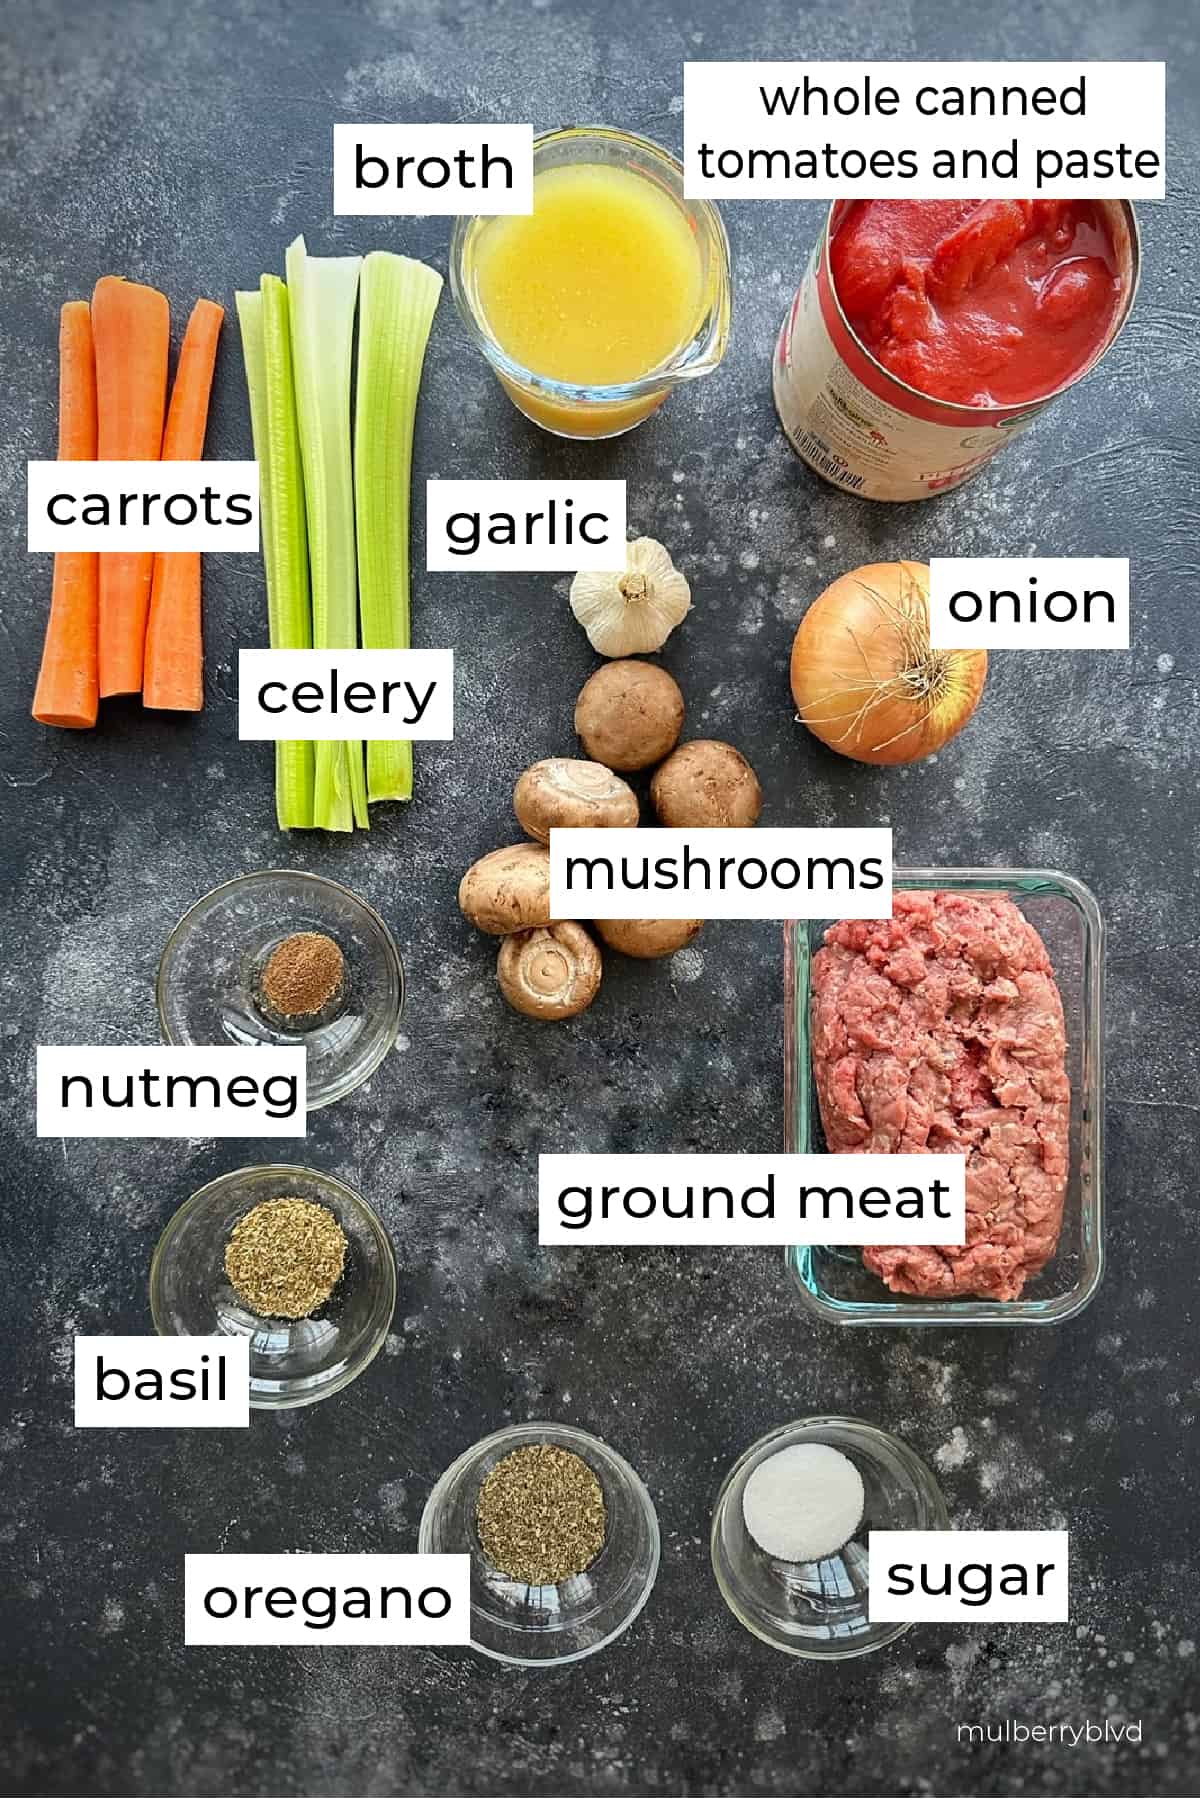 an image with all the ingredients with labels, including the vegetables, herbs and spices, meat, broth and tomatoes.